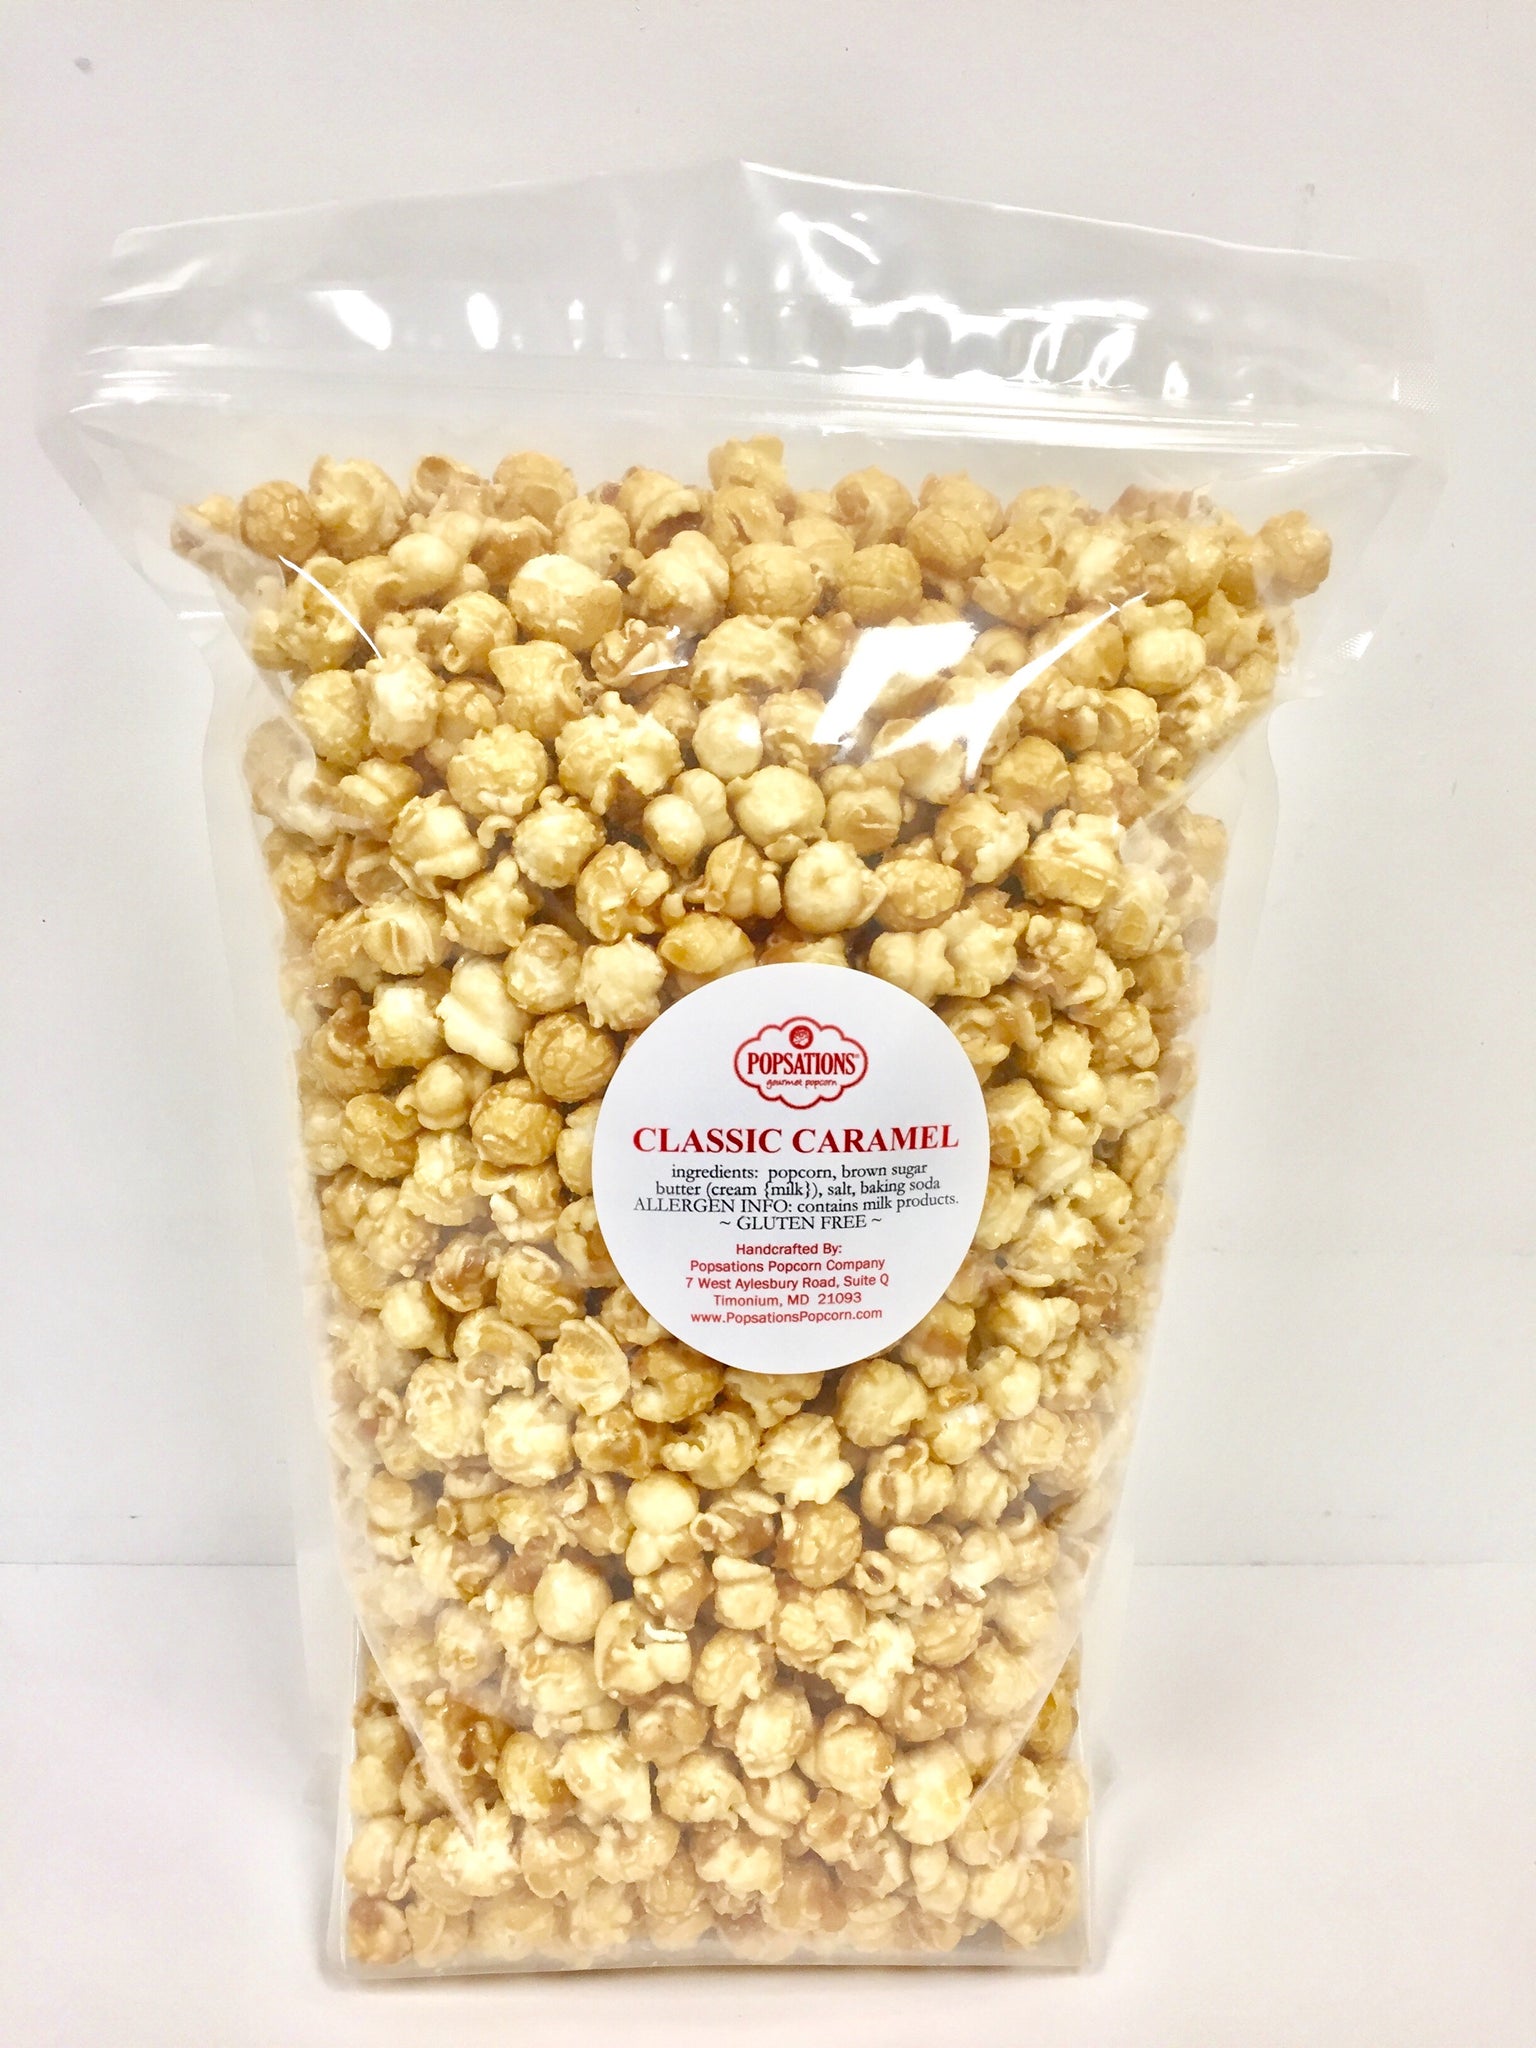 Order 6.5 Gallon Bags of Gourmet Popcorn (Available in 30+ Flavors)